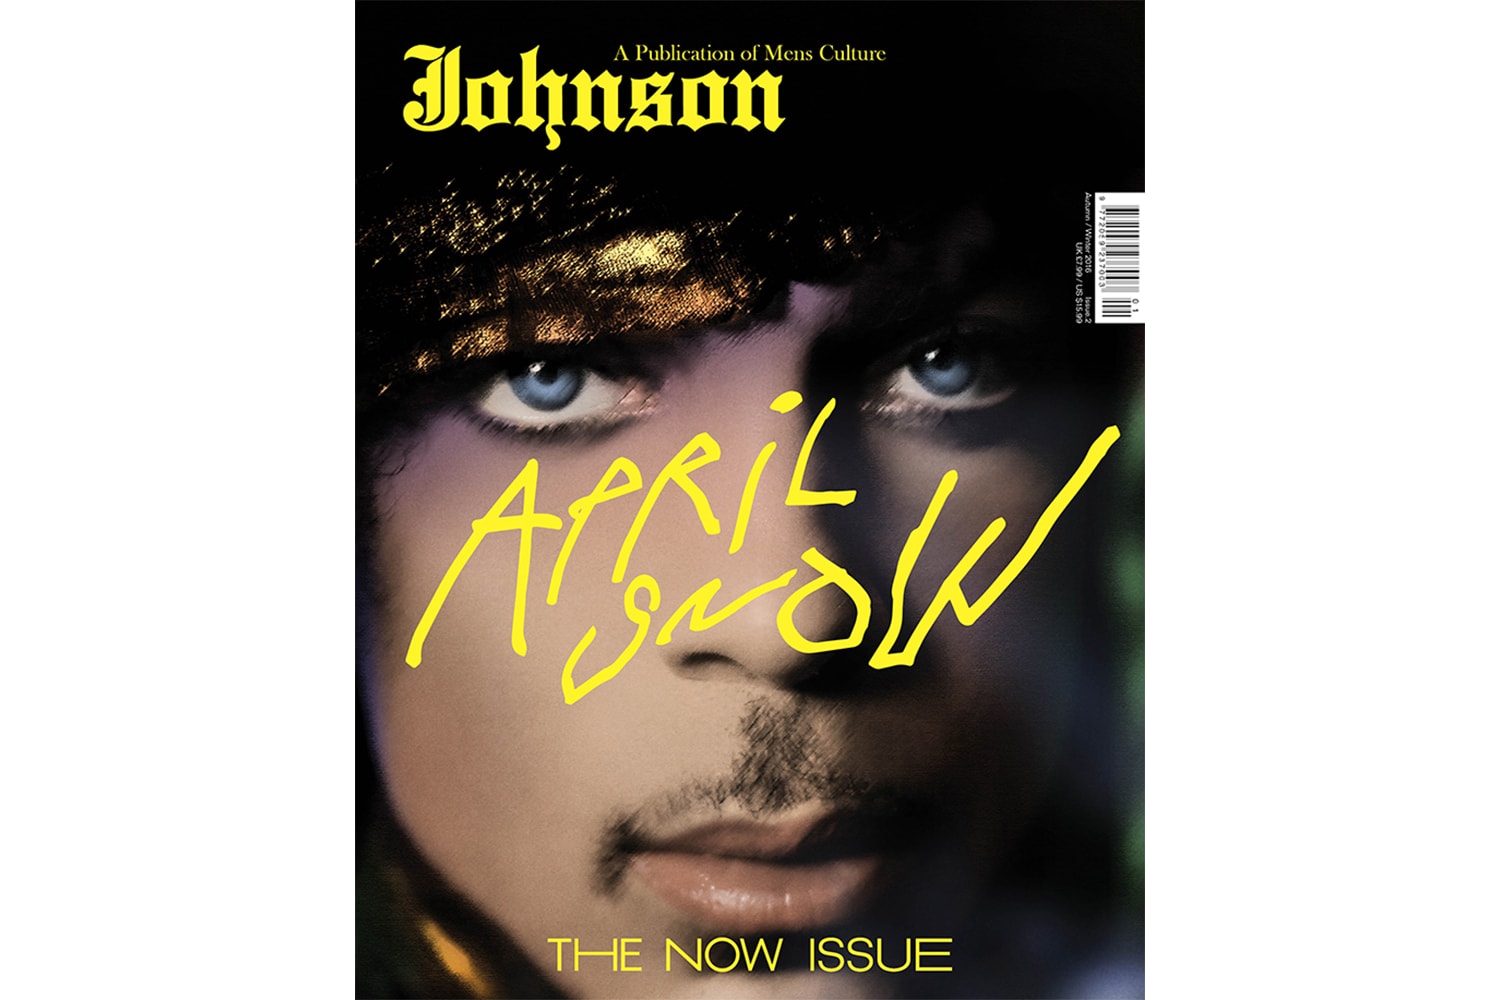 Johnson The Now Issue Prince Fendi